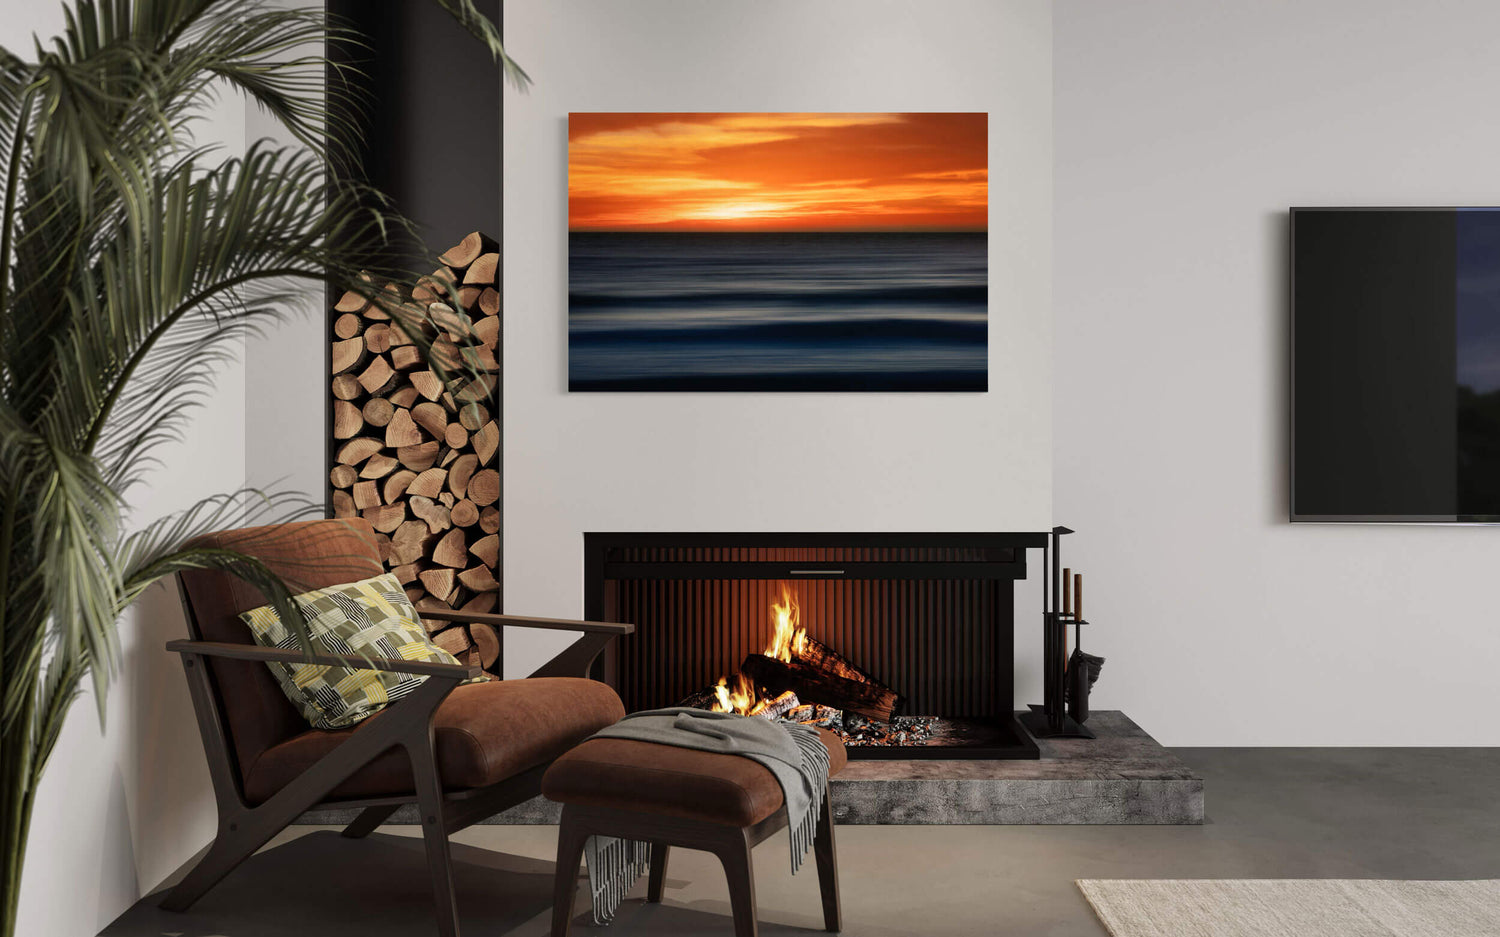 A Big Sur sunset picture captured along the California coast hangs in a living room.